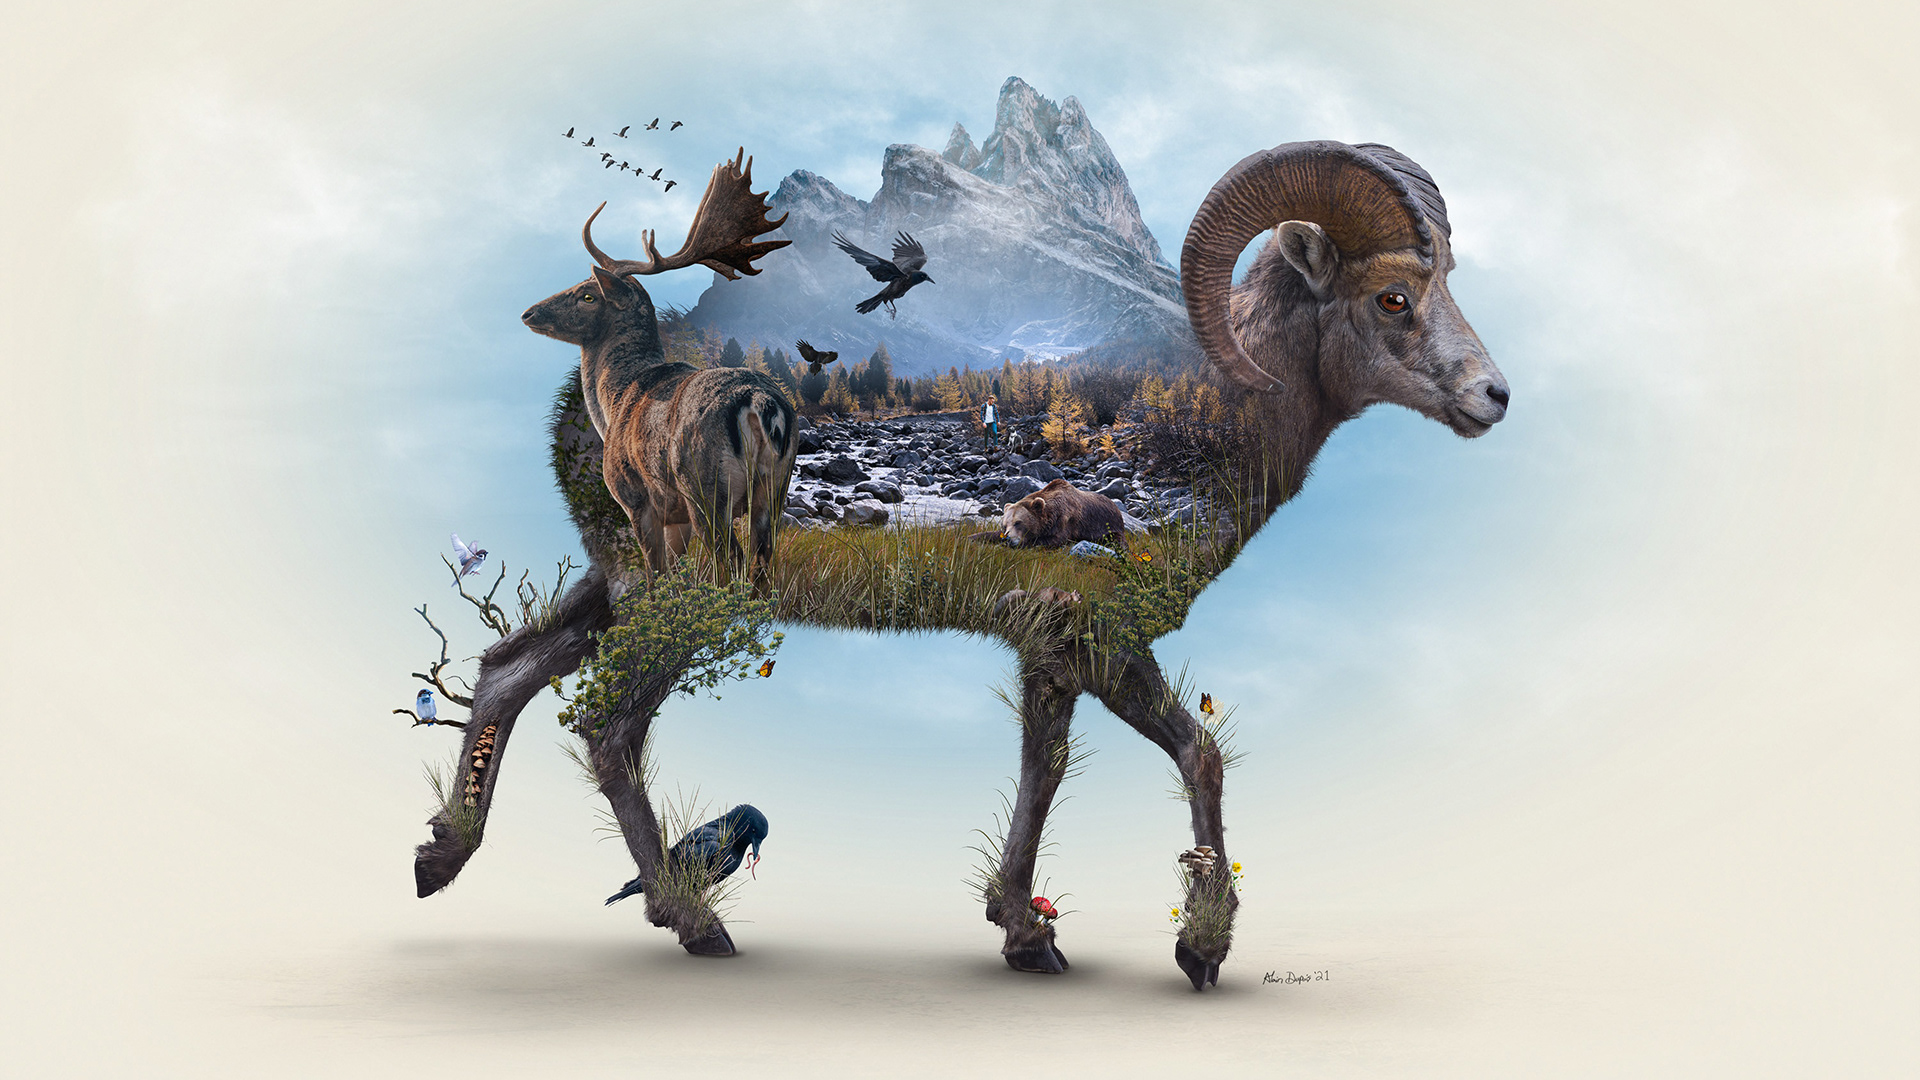 A surreal piece that focuses on animals found in the rocky mountains
